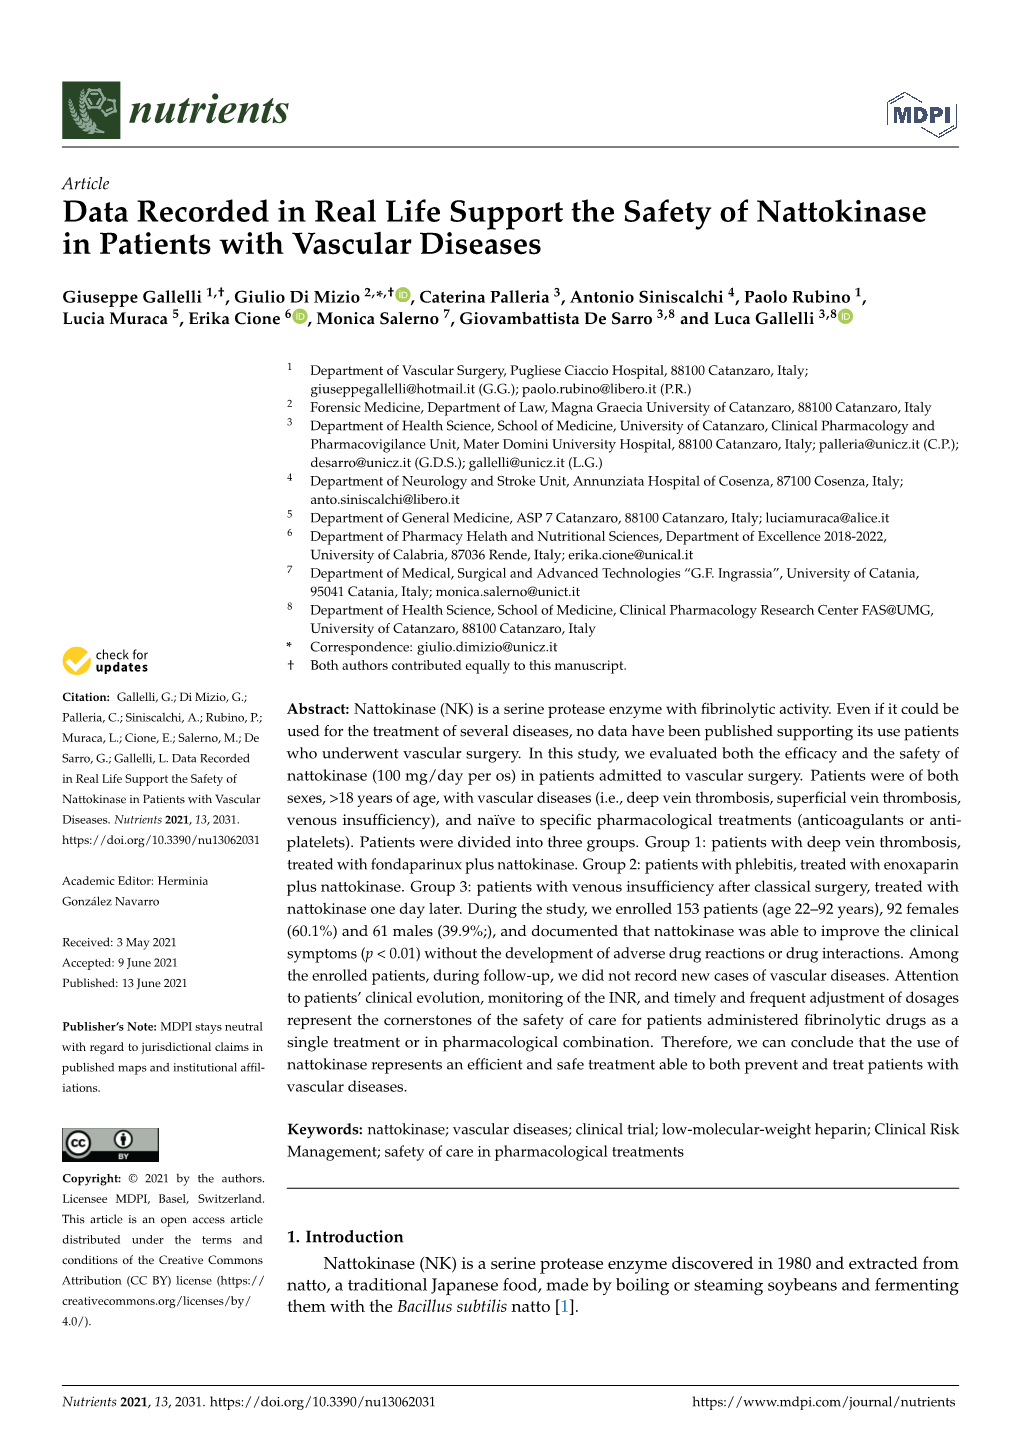 Data Recorded in Real Life Support the Safety of Nattokinase in Patients with Vascular Diseases